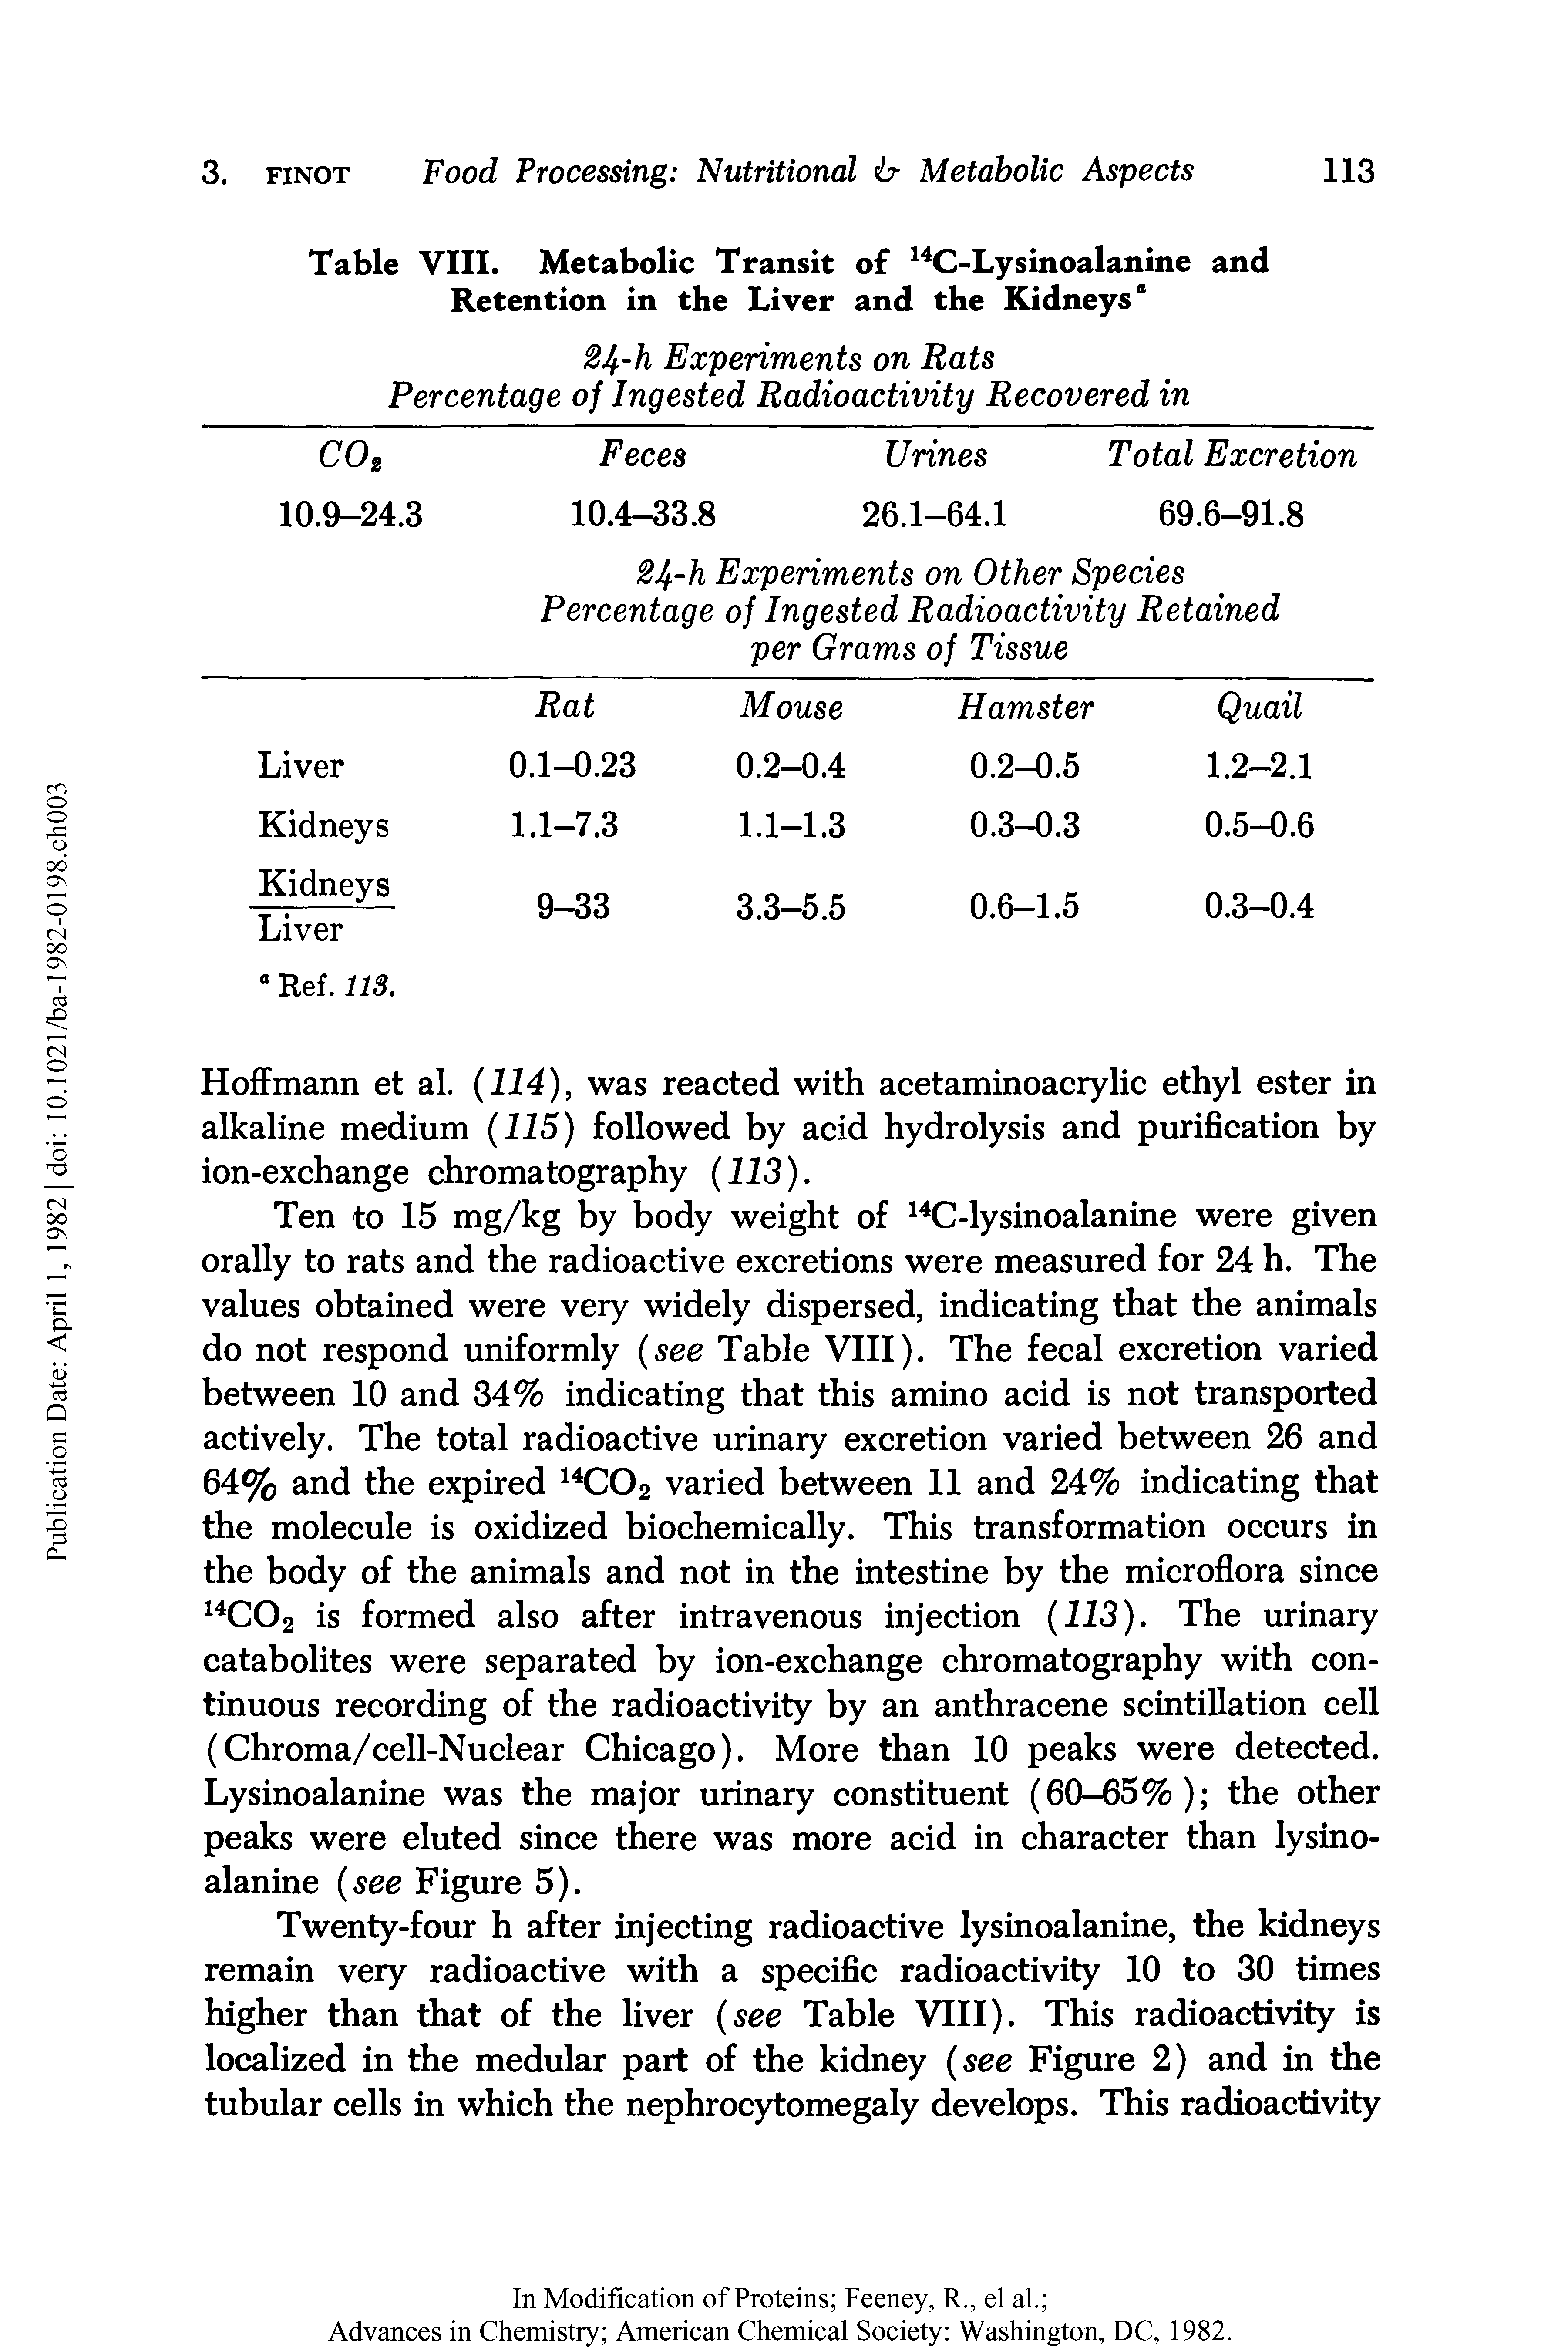 Table VIII. Metabolic Transit of 14C-Lysinoalanine and Retention in the Liver and the Kidneys0...